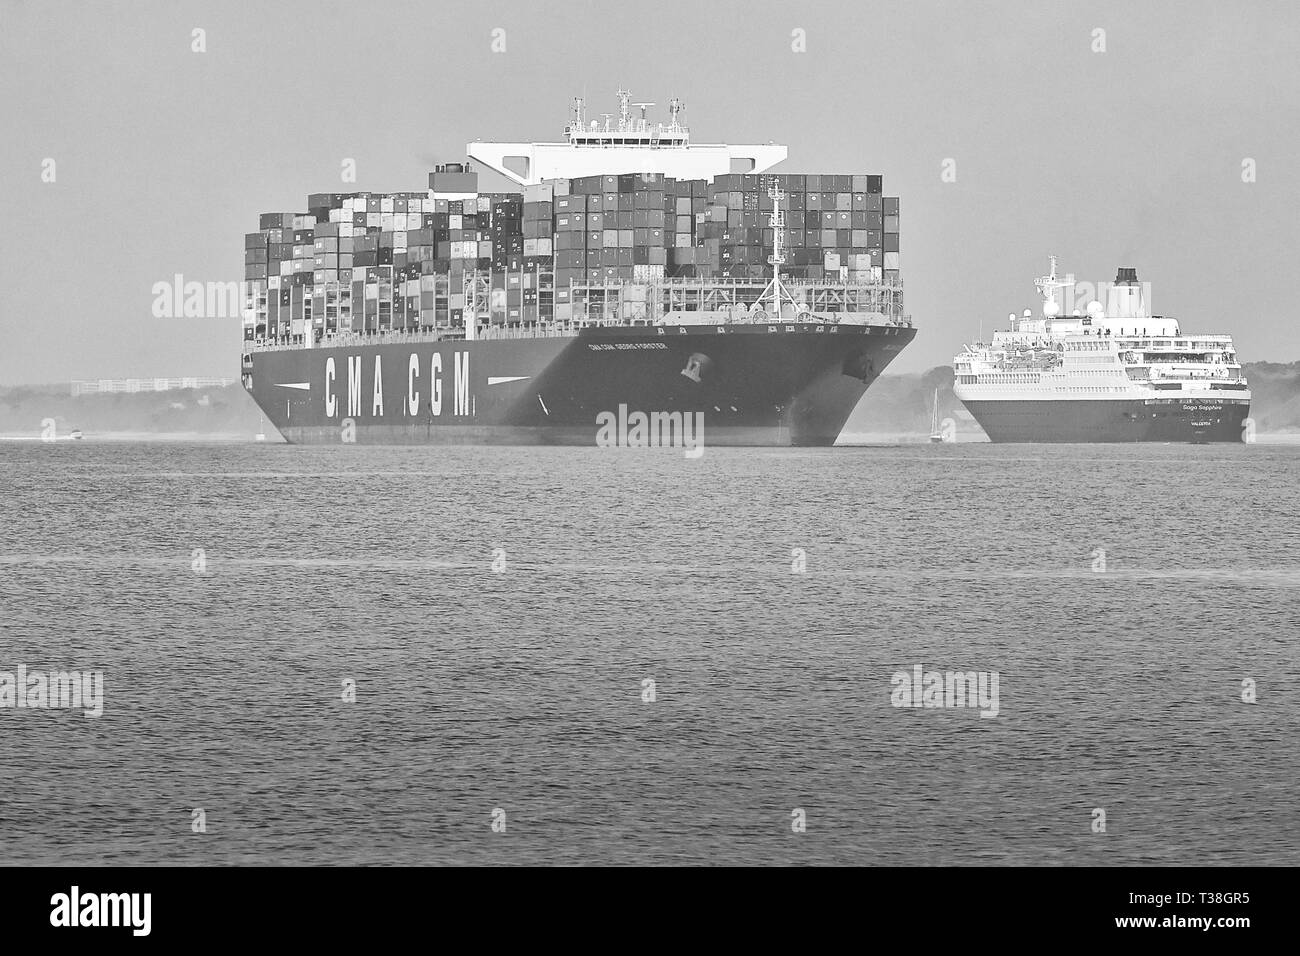 Black And White Photo Of The Container Ship, CMA CGM GEORG FORSTER, Leaving The Port Of Southampton, The SAGA SAPPHIRE Passing To Port. Stock Photo